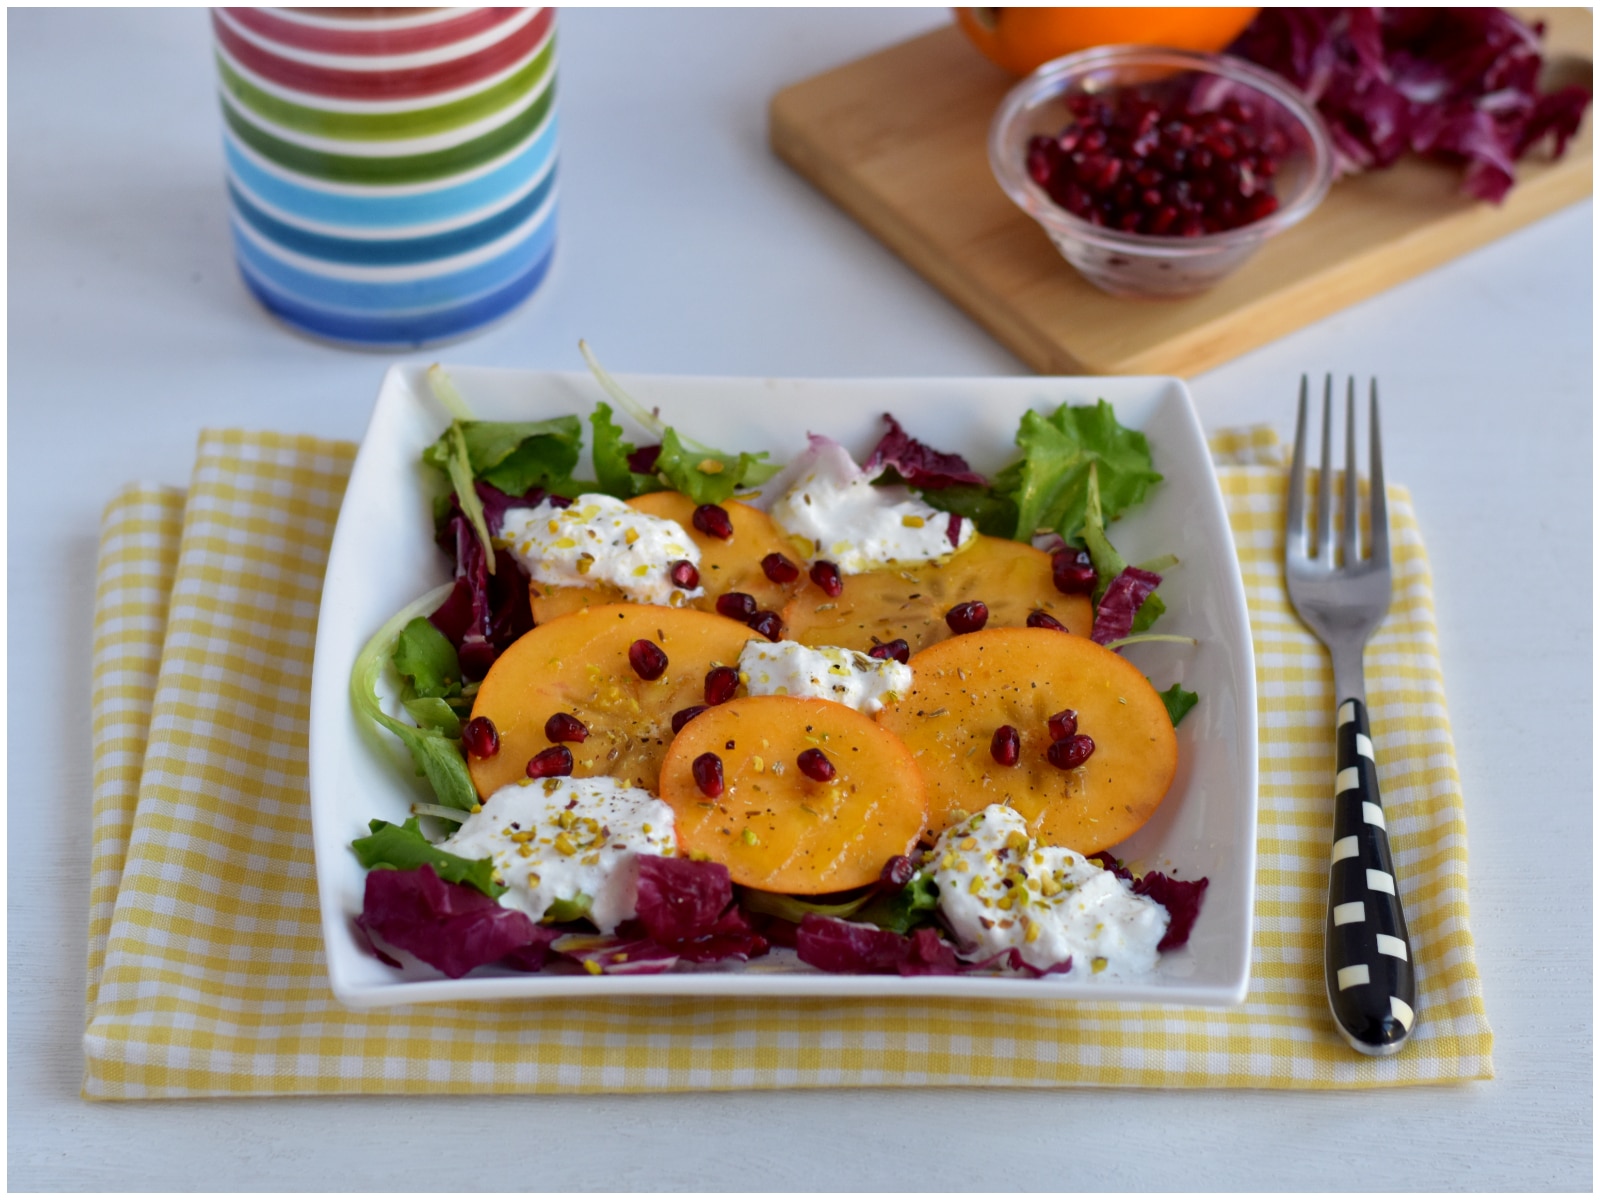 Pomegranate and persimmon apple salad